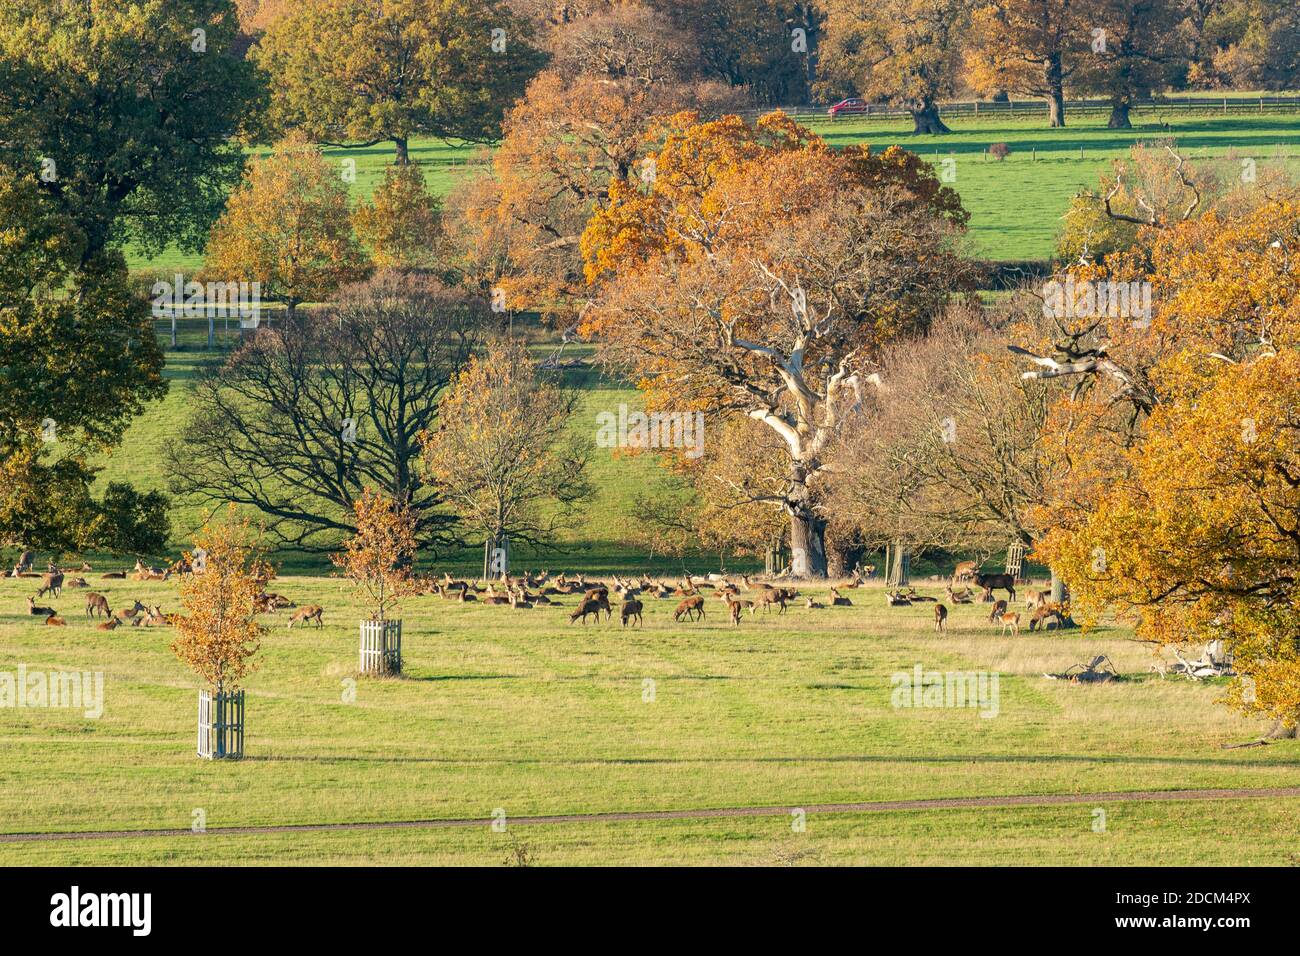 Red deer (Cervus elaphus) in the Deer Park, part of Windsor Great Park, Berkshire, UK, with mature trees with autumn colours Stock Photo